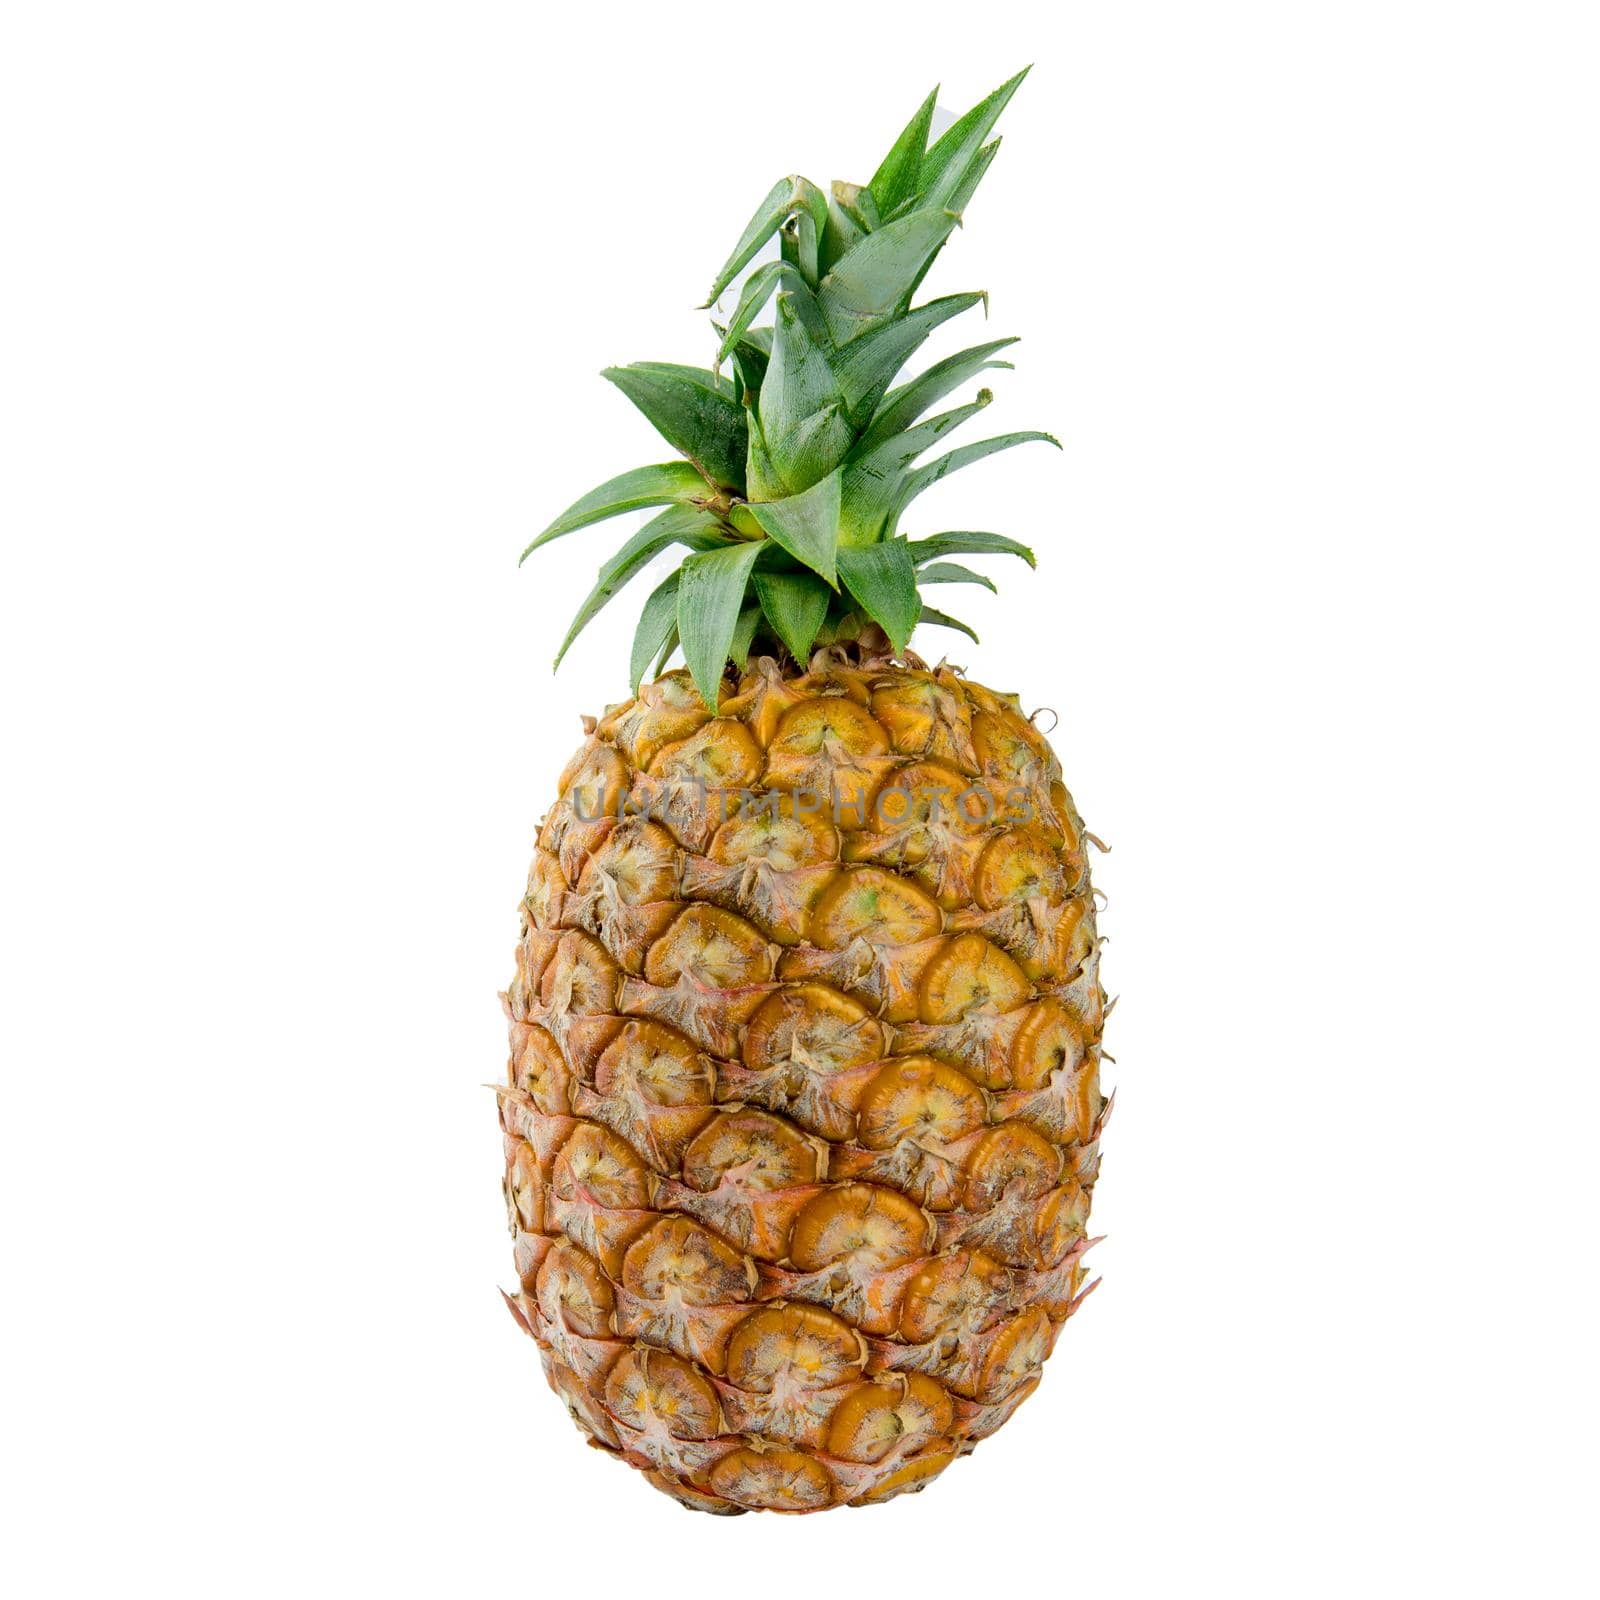 Pineapple on isolated white background. Food and vegetable concept. Clipping path use